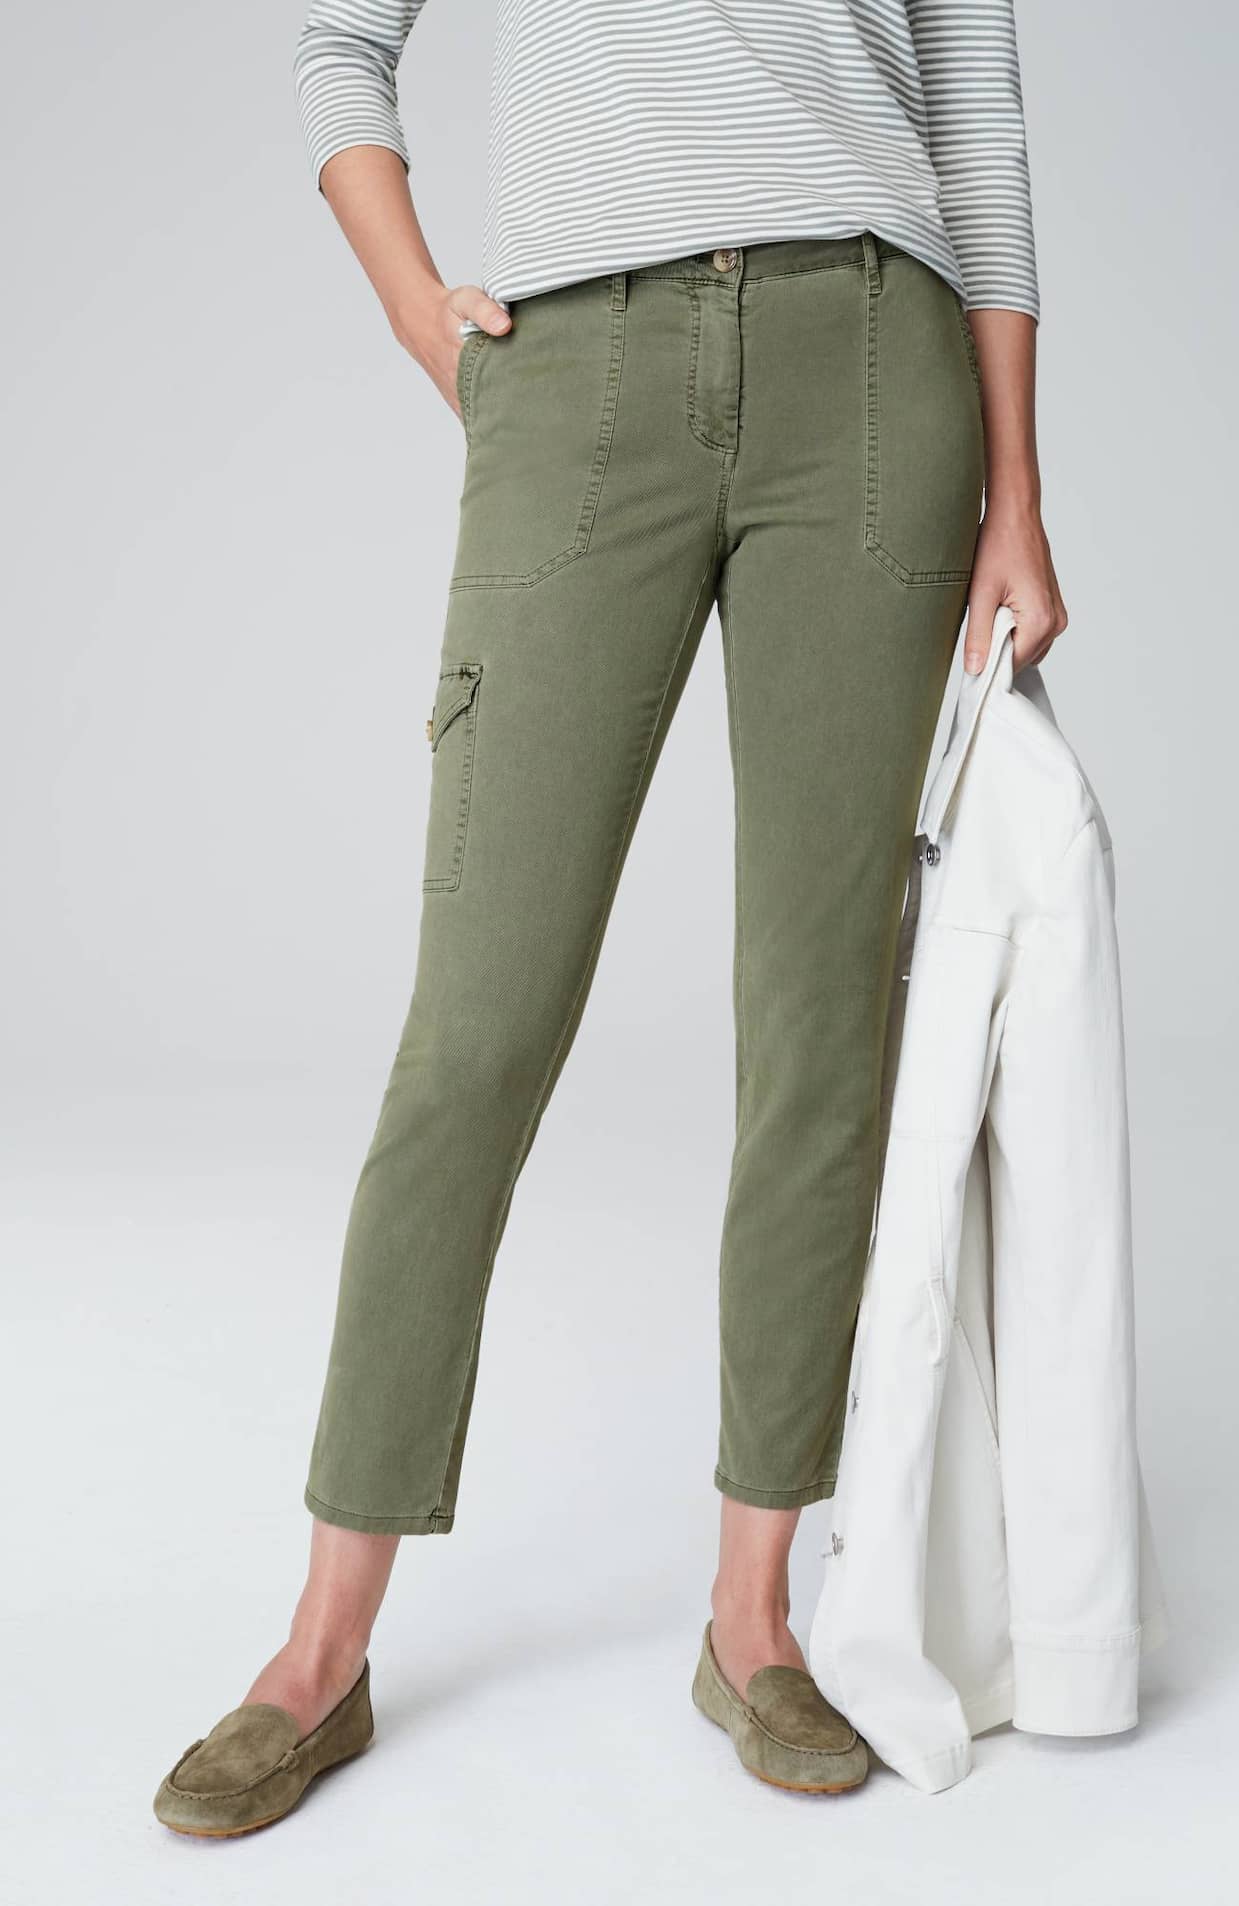 Women High Waisted Leaf Printed Loose Cargo Pants S-L - 4L38XC661